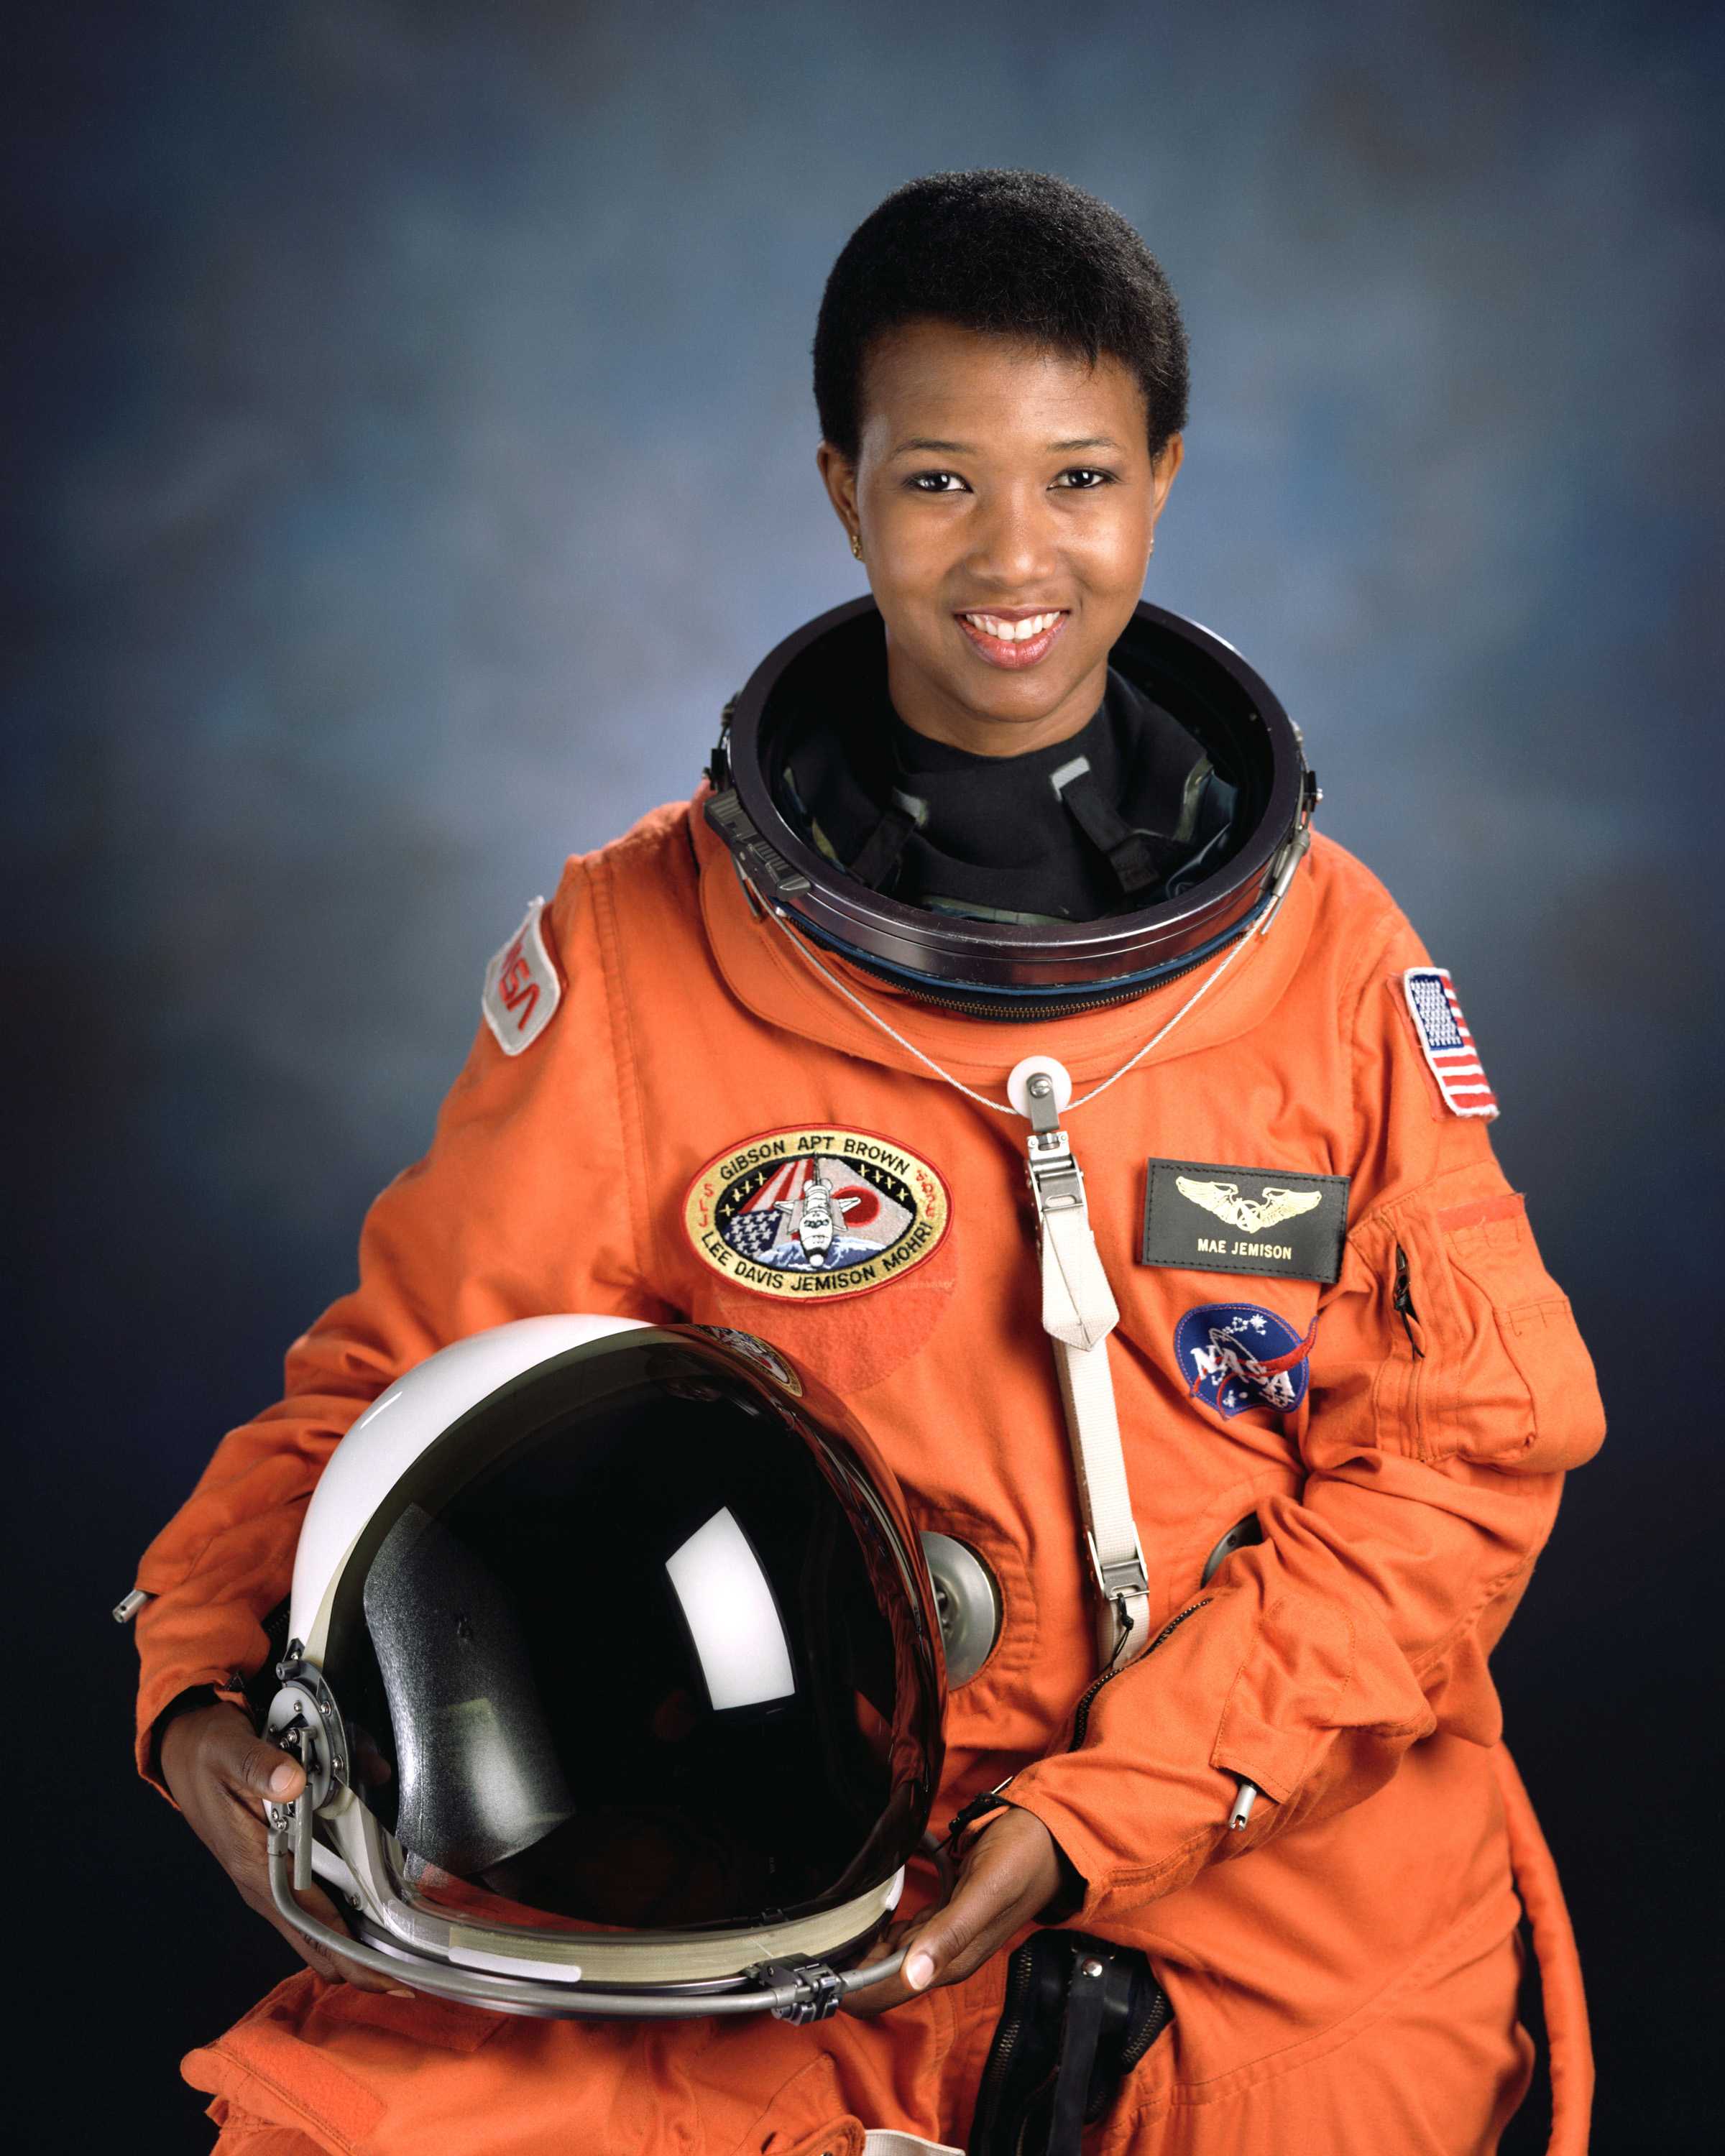 Jeminson is wearing a NASA orange space suit and holding a helmet as she poses for her portrait.